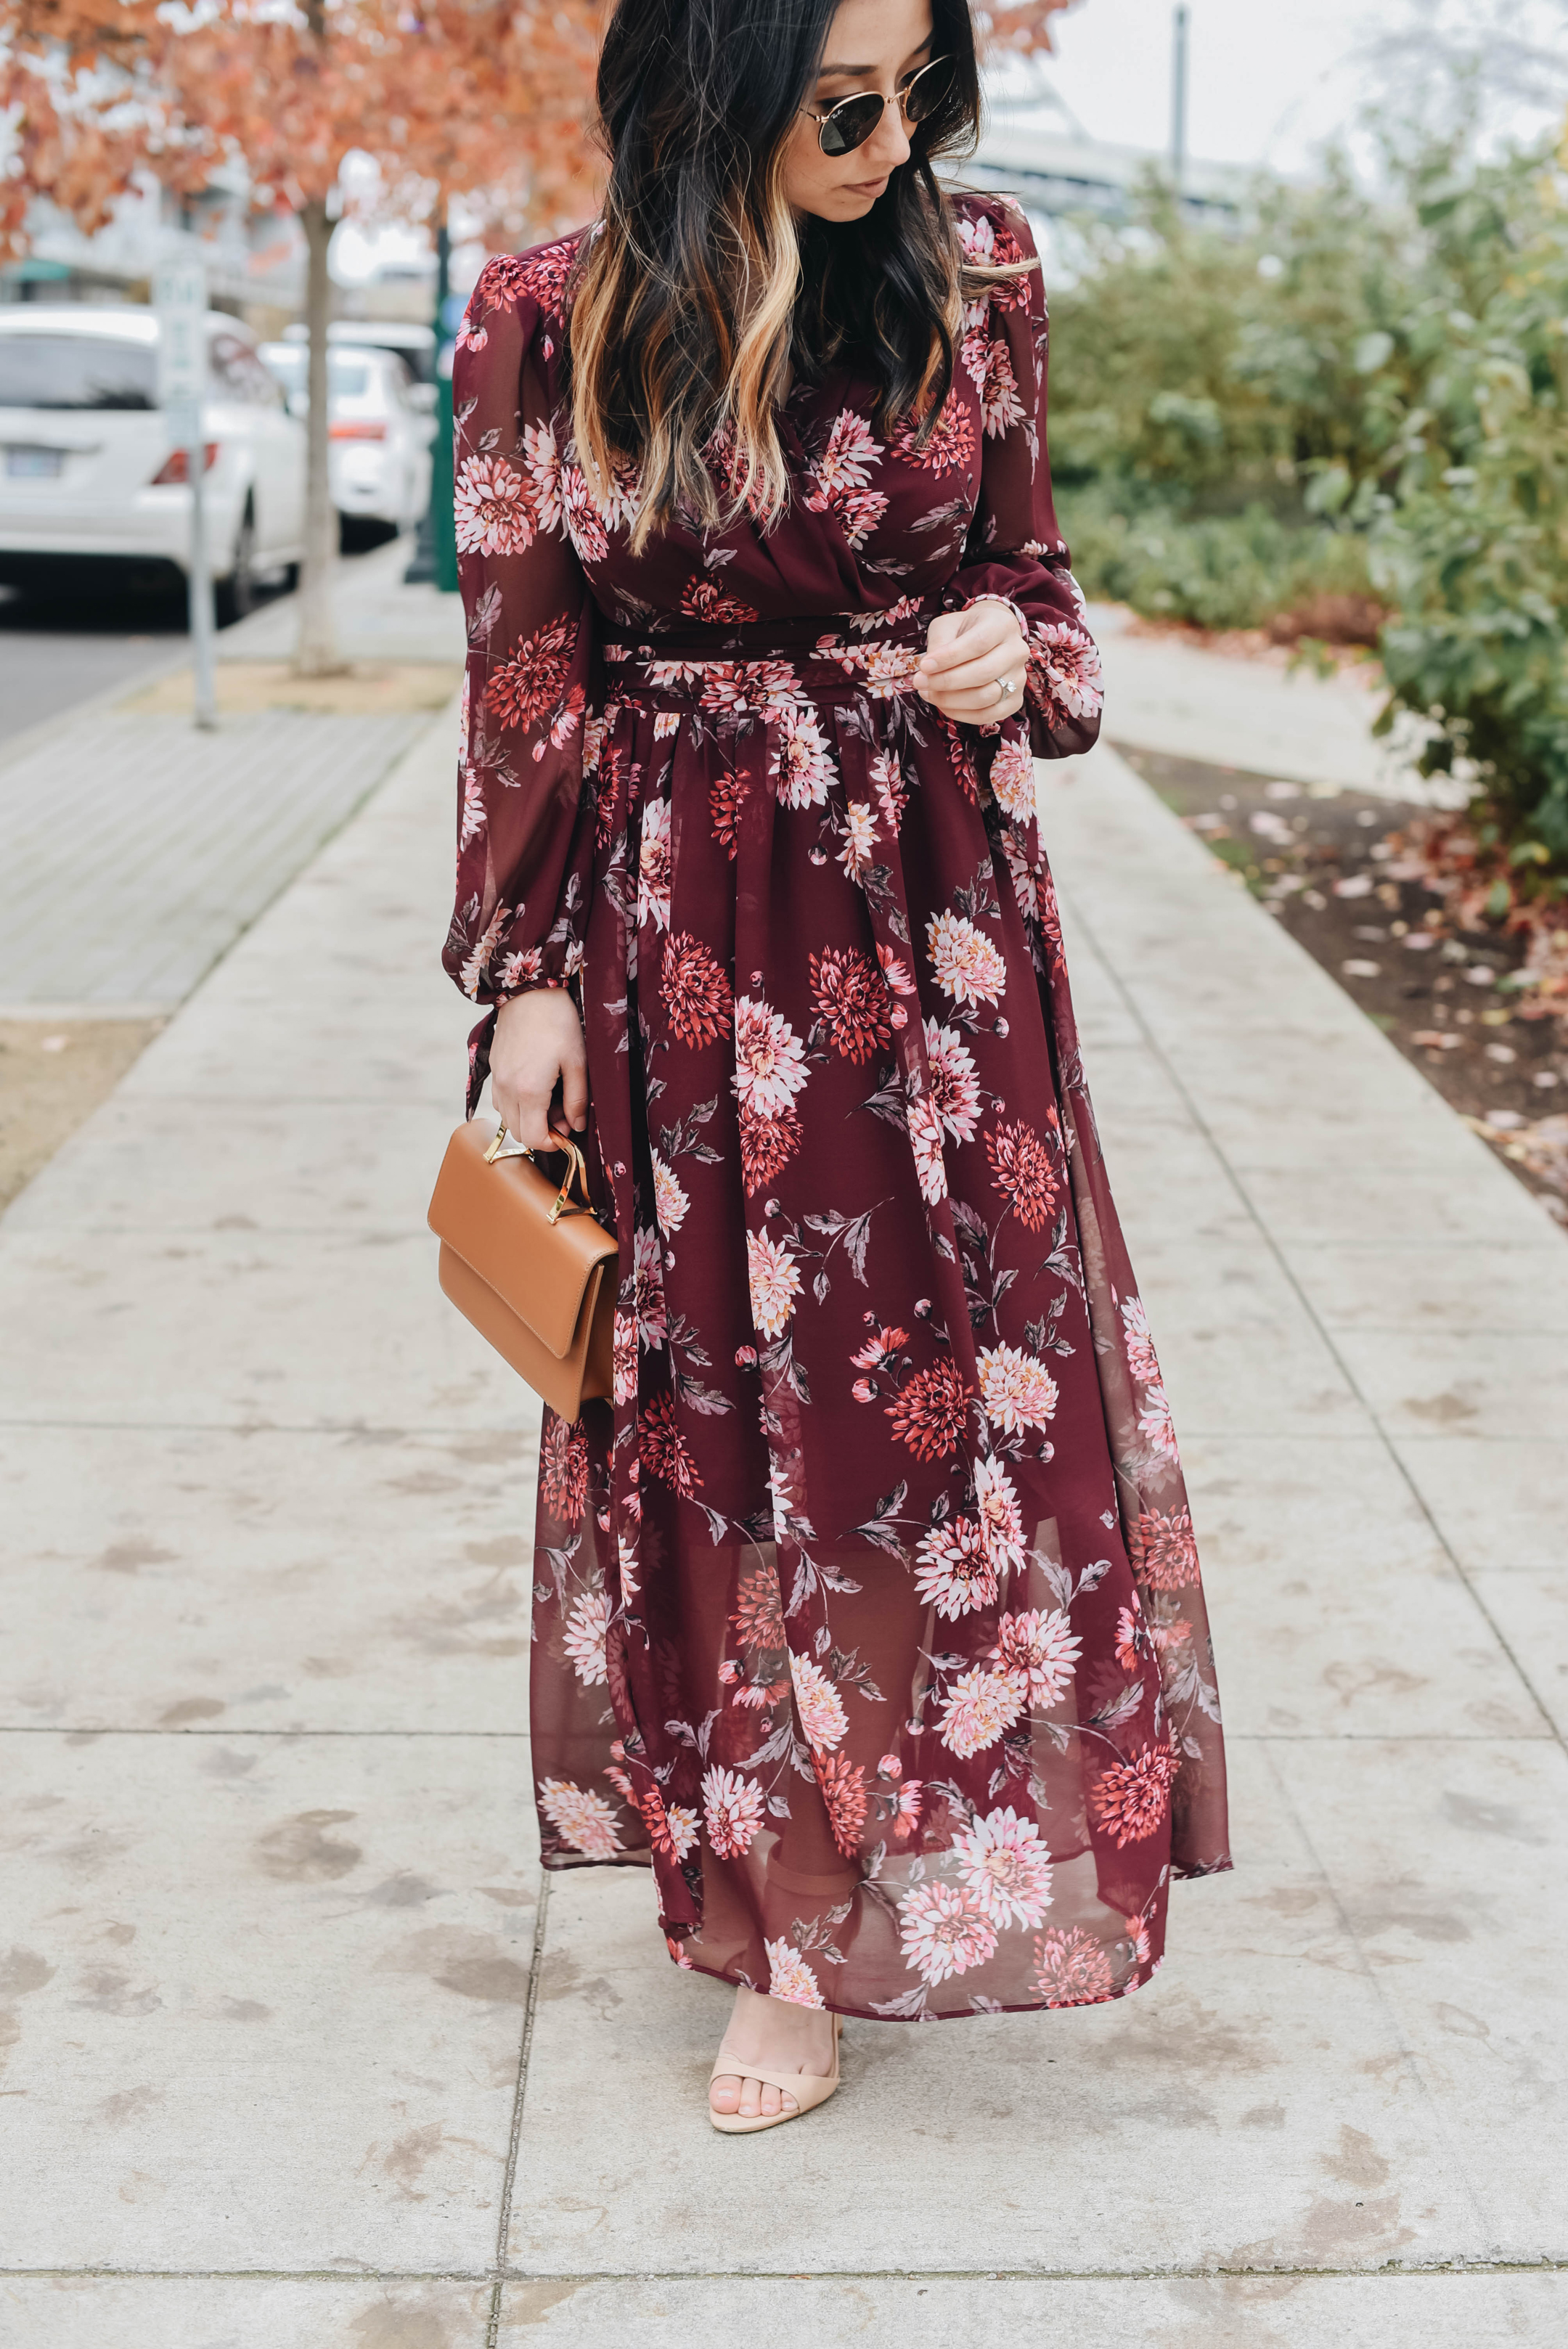 What to wear to a fall wedding